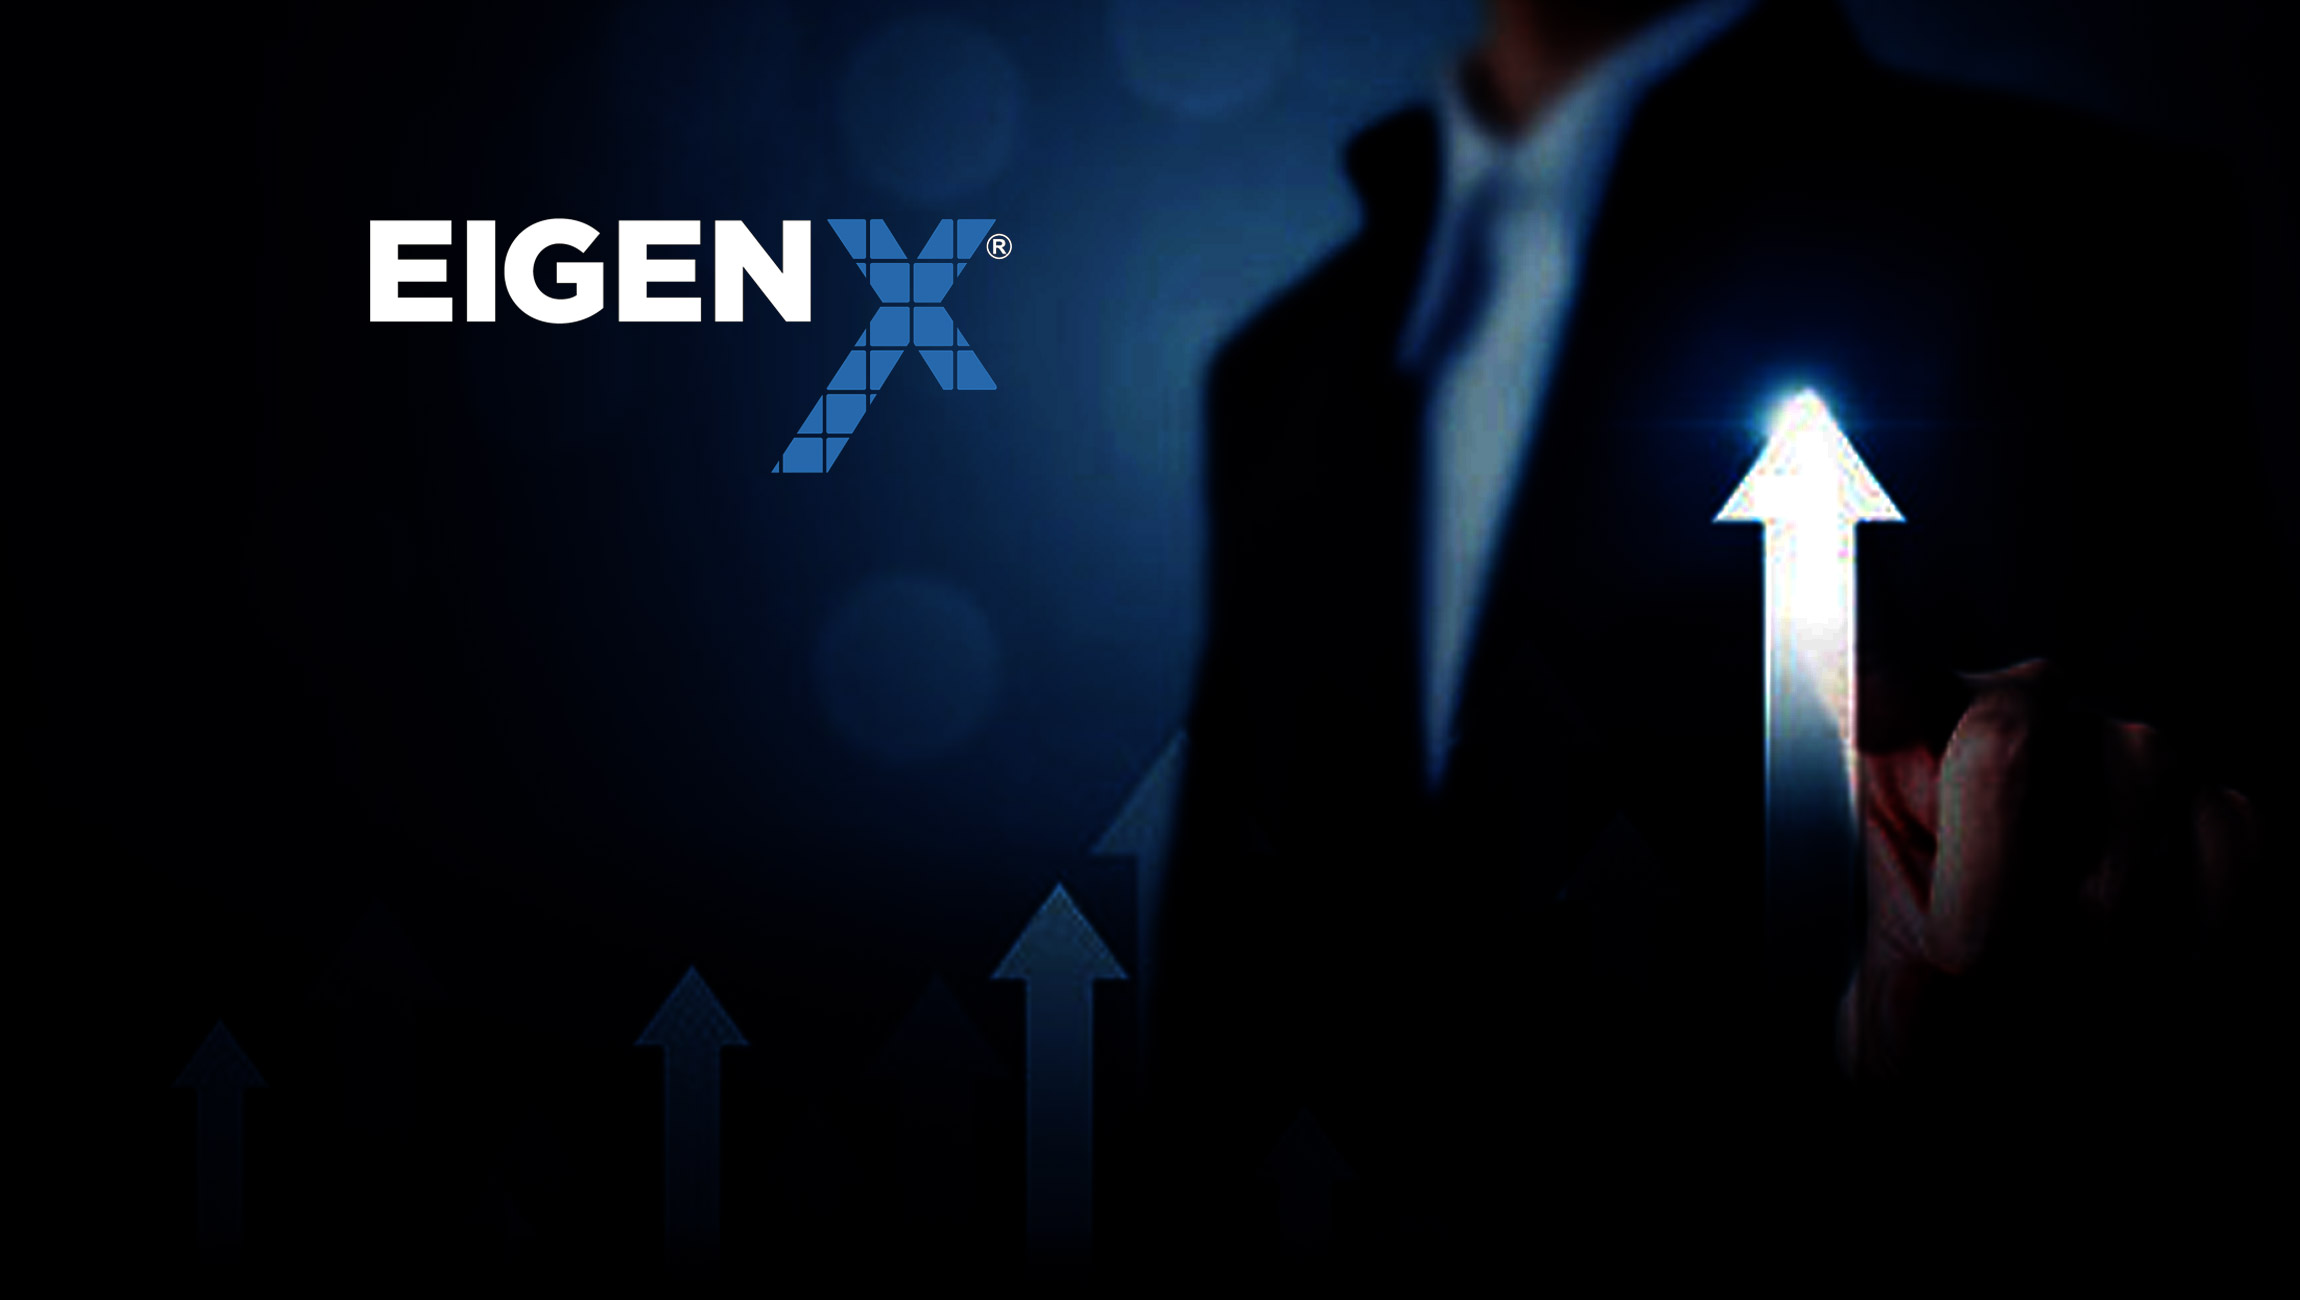 Eigen X Relocated HQ to Support Continued Growth